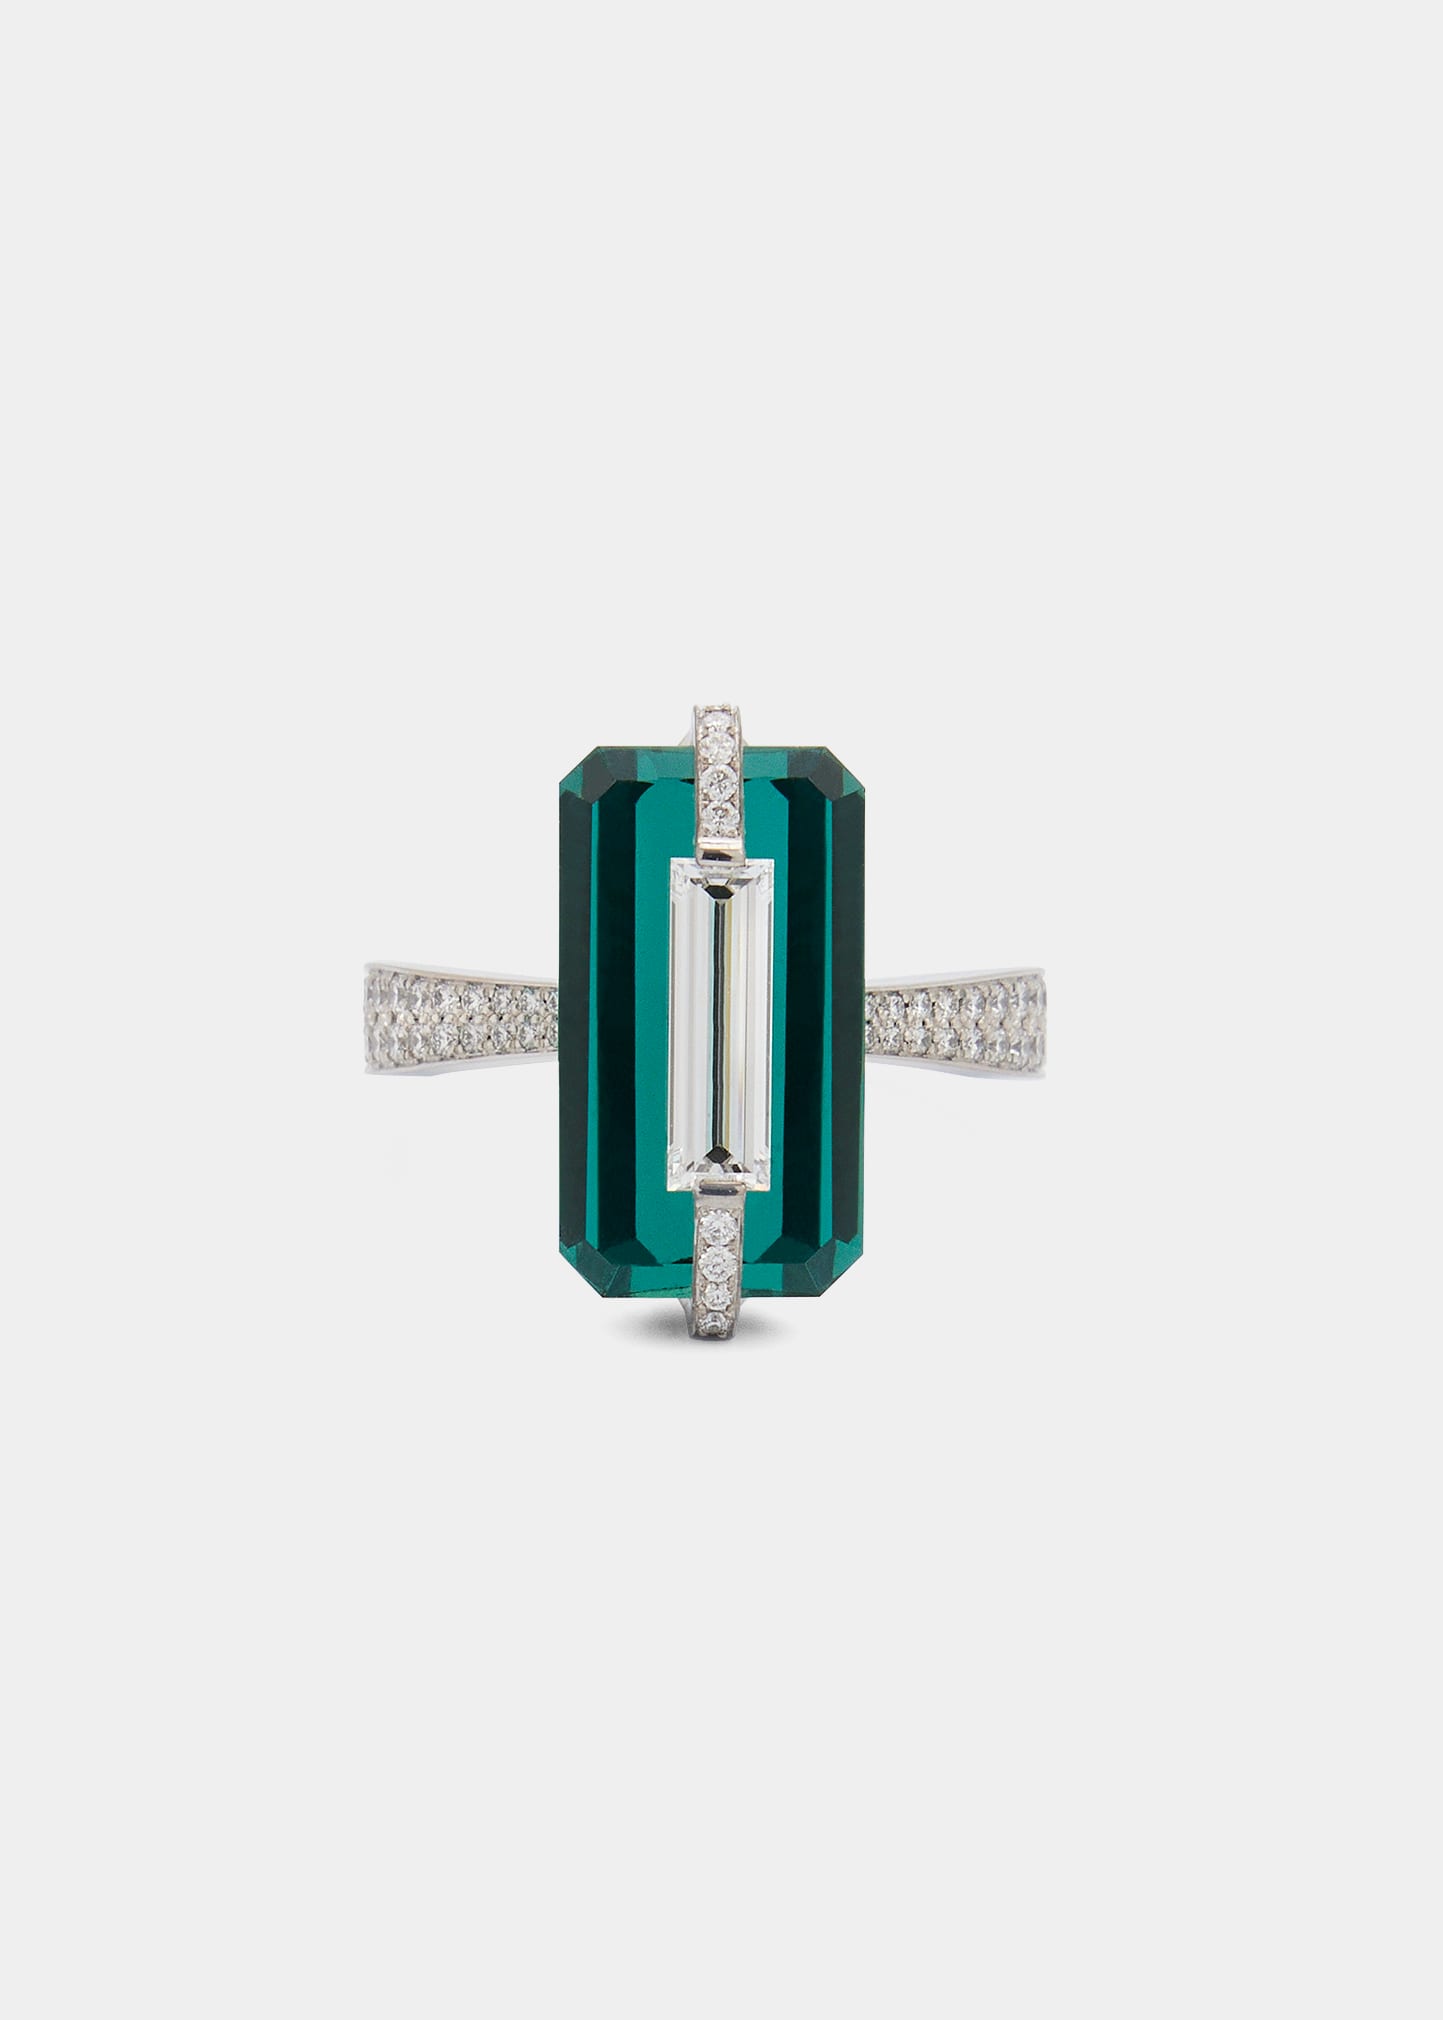 Boghossian 18K White Gold Ring with Diamonds and Tourmaline